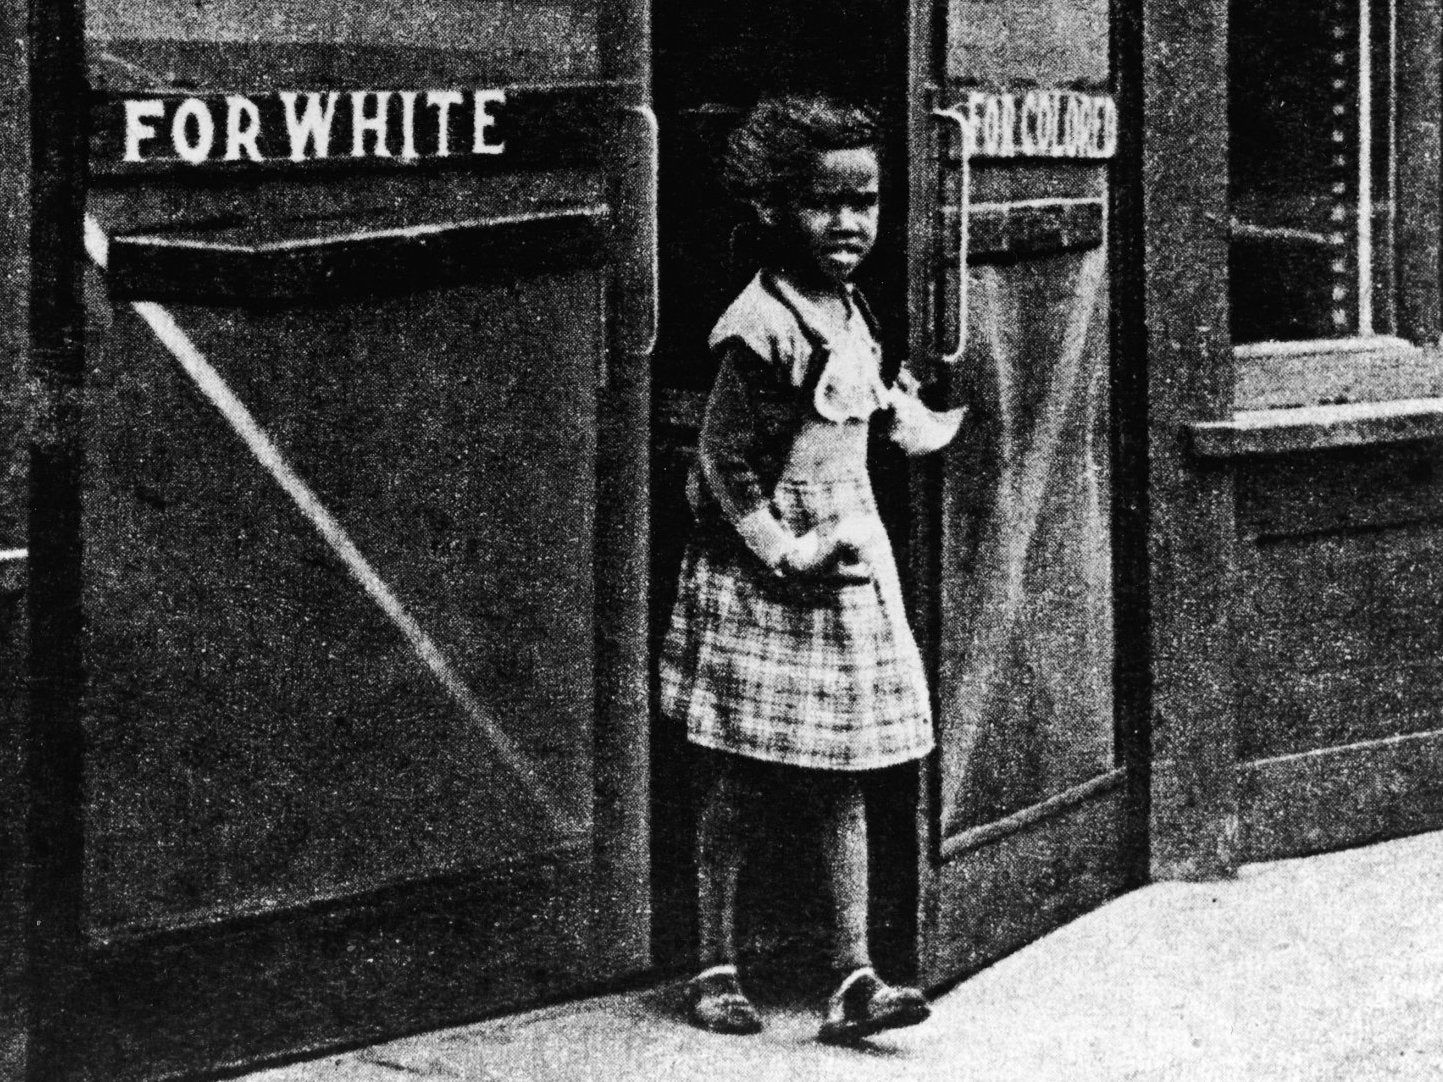 Segregation was widespread in the South in the 1940s and 1950s